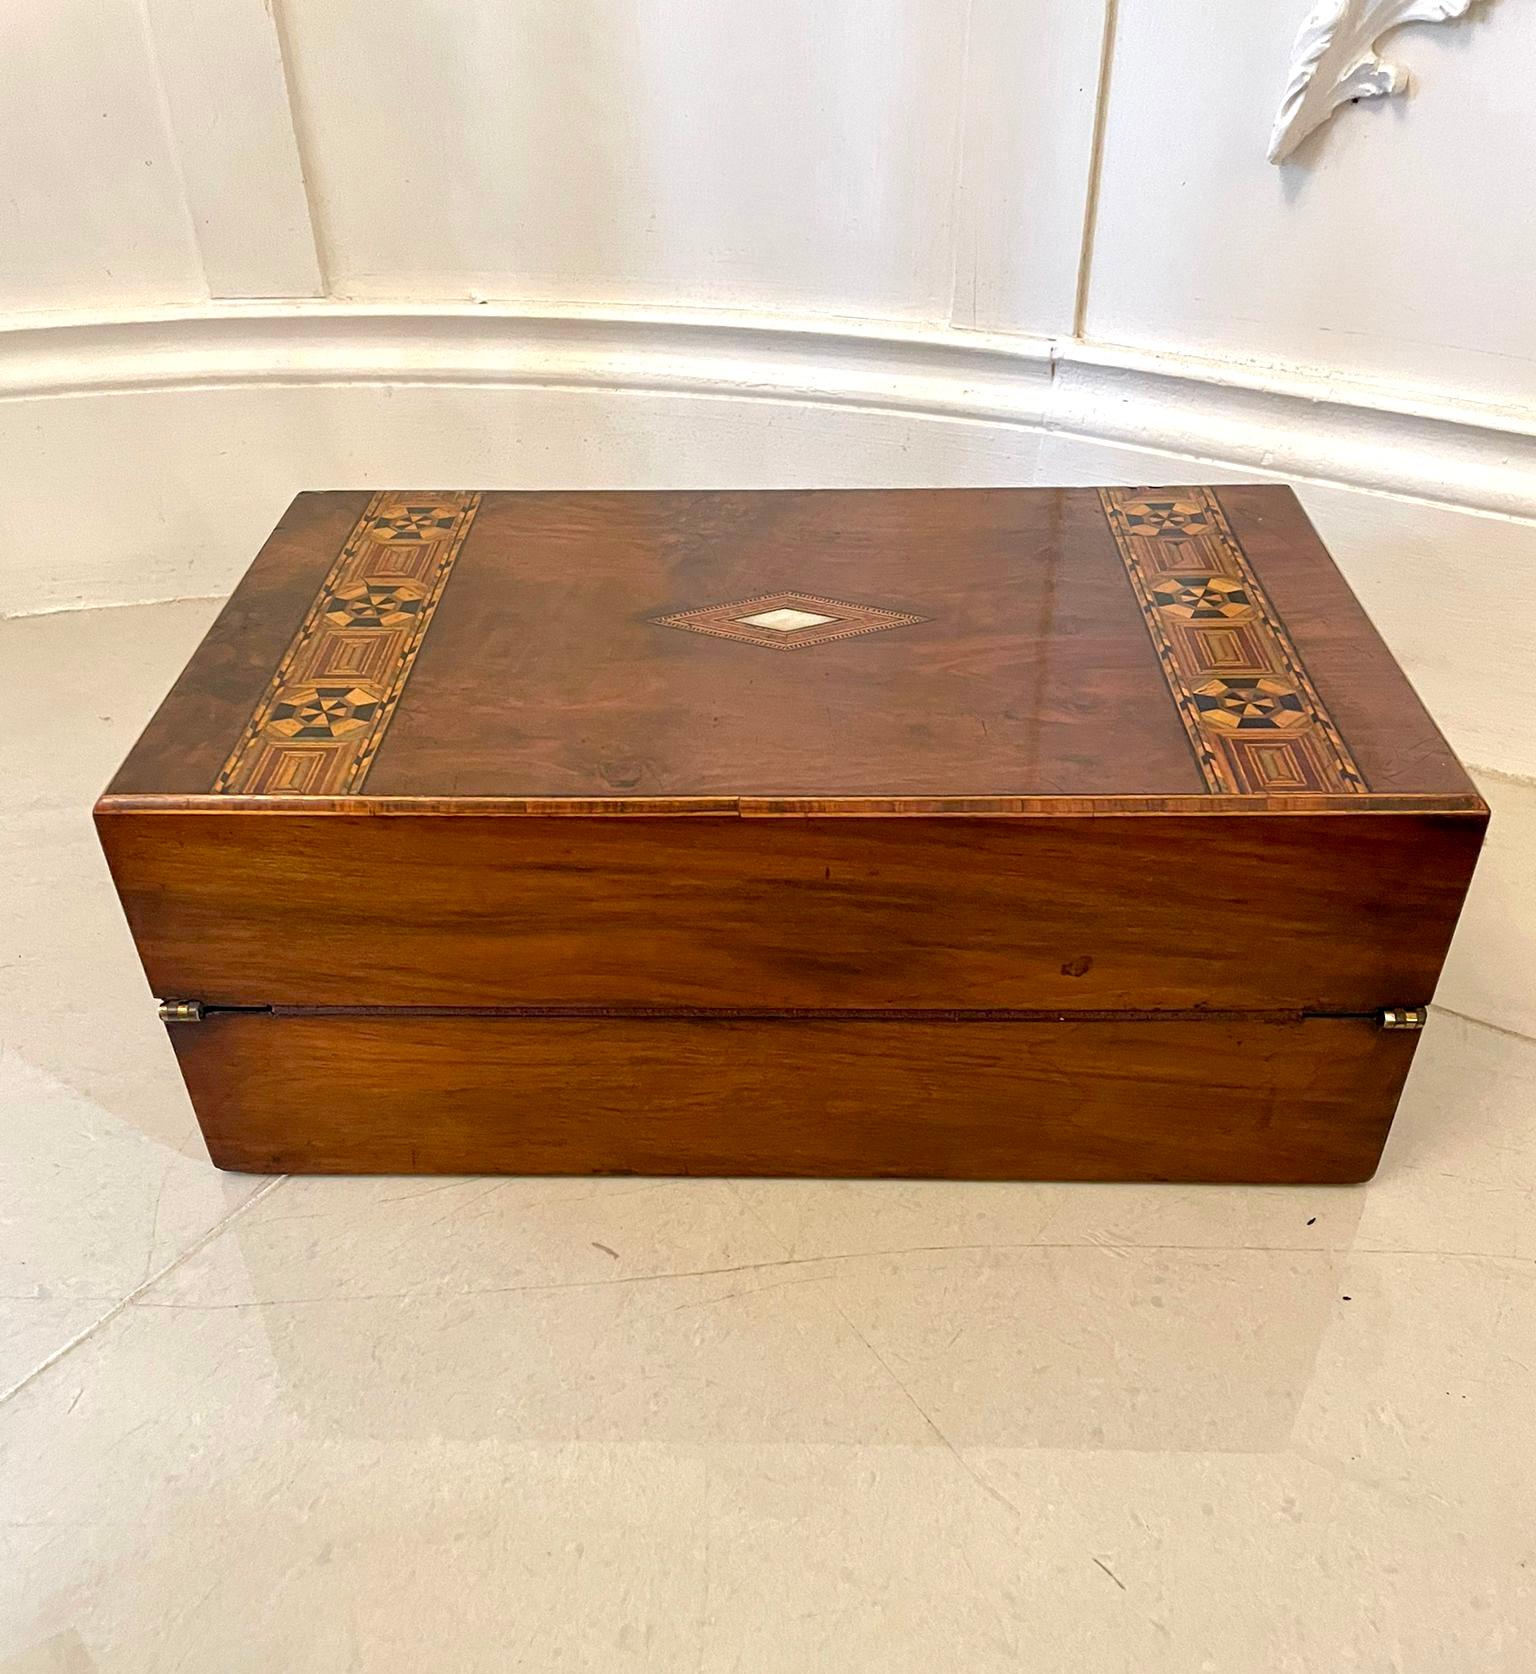 Quality antique Victorian burr walnut Tunbridge Ware inlay writing box having a fantastic burr walnut and Tunbridge Ware inlay opening to reveal a leather writing slope with two storage compartments with original key

Measures: H 15.5cm 
W 39.5cm